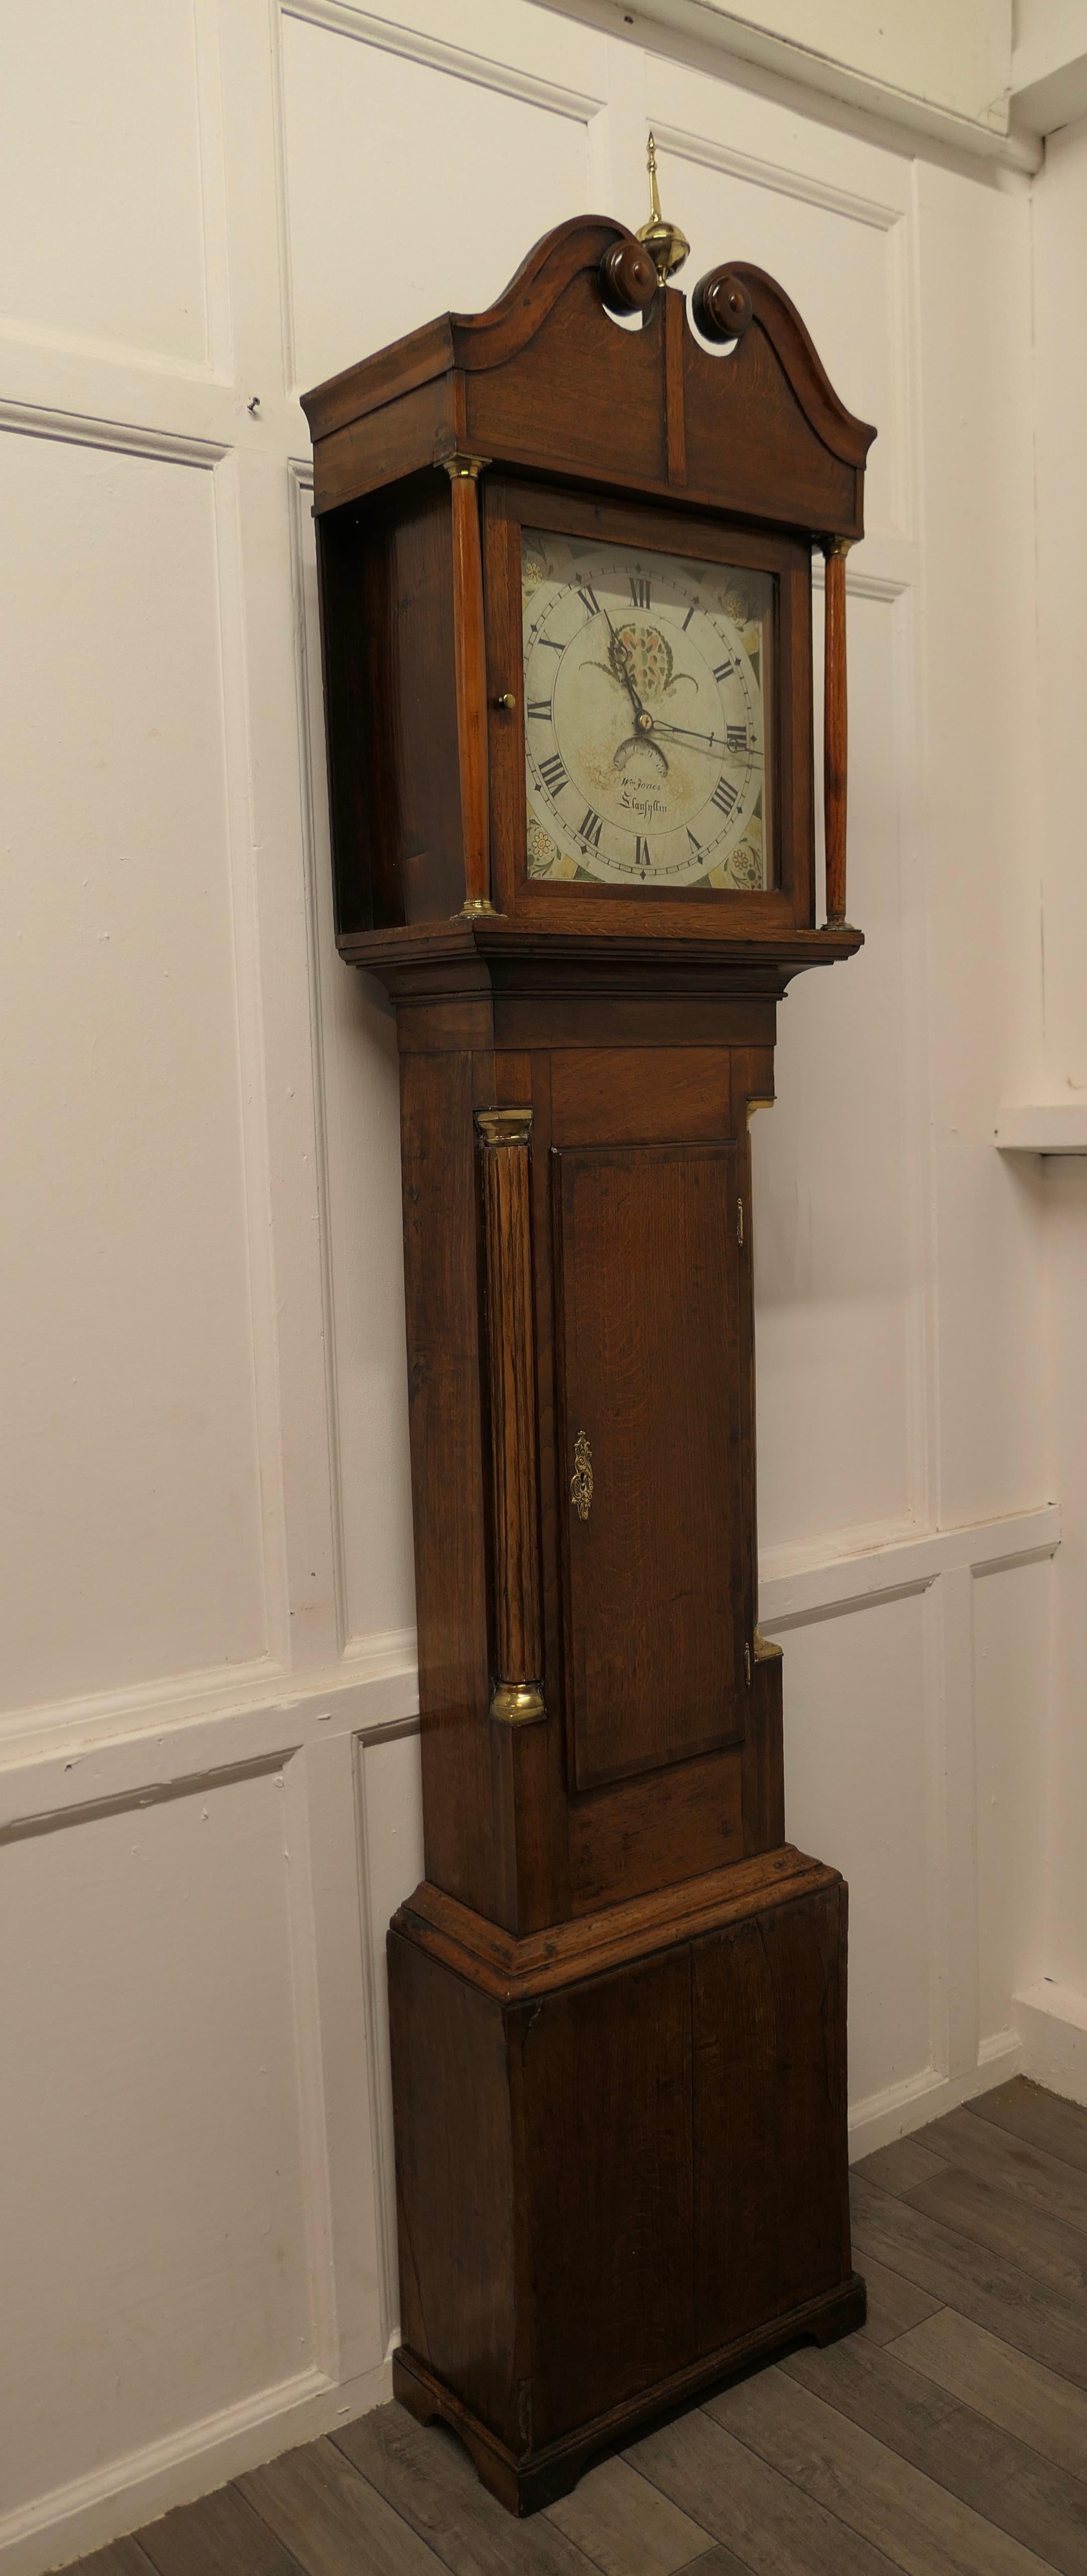 19th century Welsh Country oak long case clock by Wm Jones of Llanfyllin.

19th Century Country oak clock with a painted enamel face and a calendar aperture date display by Wm Jones of Llanfyllin.

Both a Good Working and Decorative piece, both